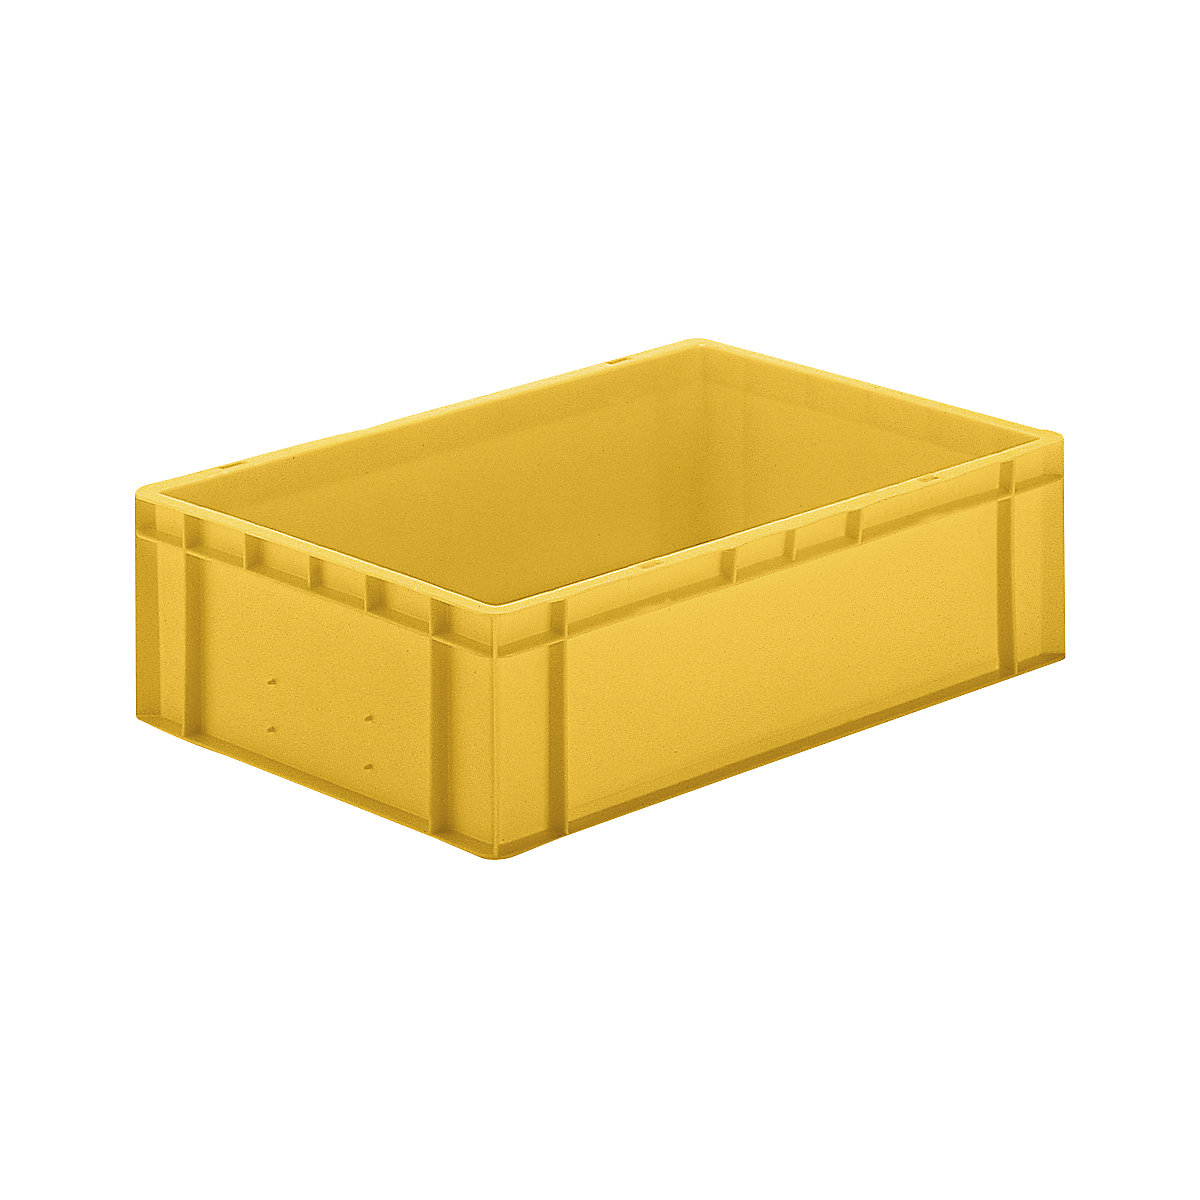 Euro stacking container, closed walls and base, LxWxH 600 x 400 x 175 mm, yellow, pack of 5-5